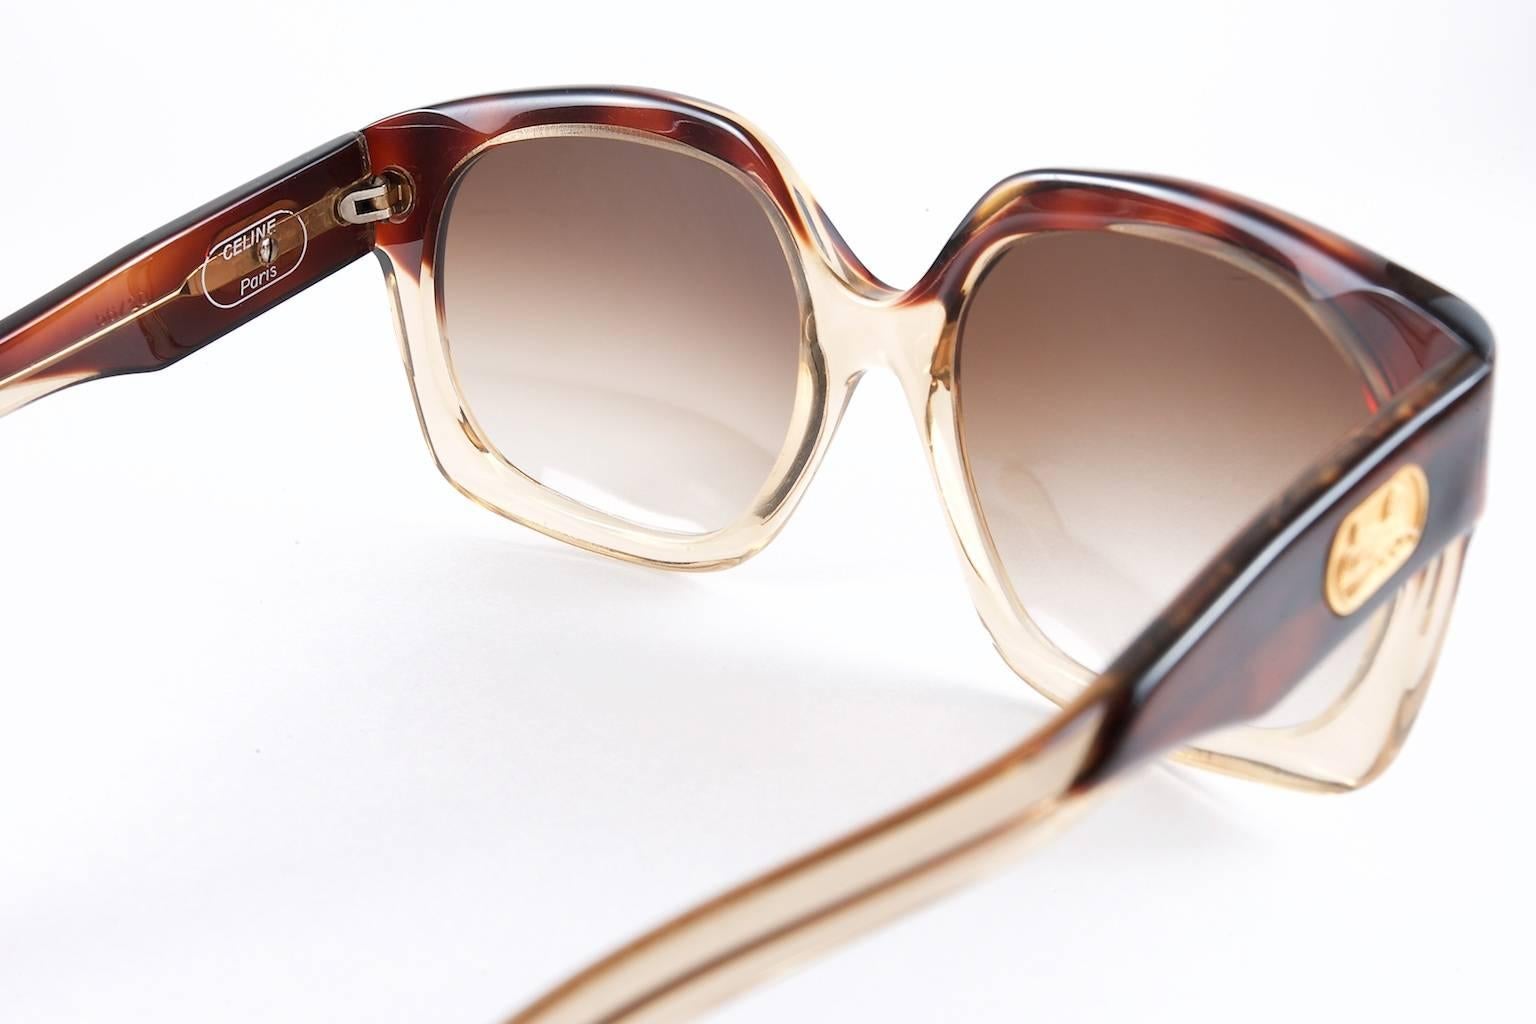 Beautiful pair of vintage Céline Paris sunglasses dating to the mid to late 1970s. Oversized square shaped frames with gradient brown lenses, complimenting the dark mahogany acetate two tone coloured frames. Distinctive gold engraved logo Céline